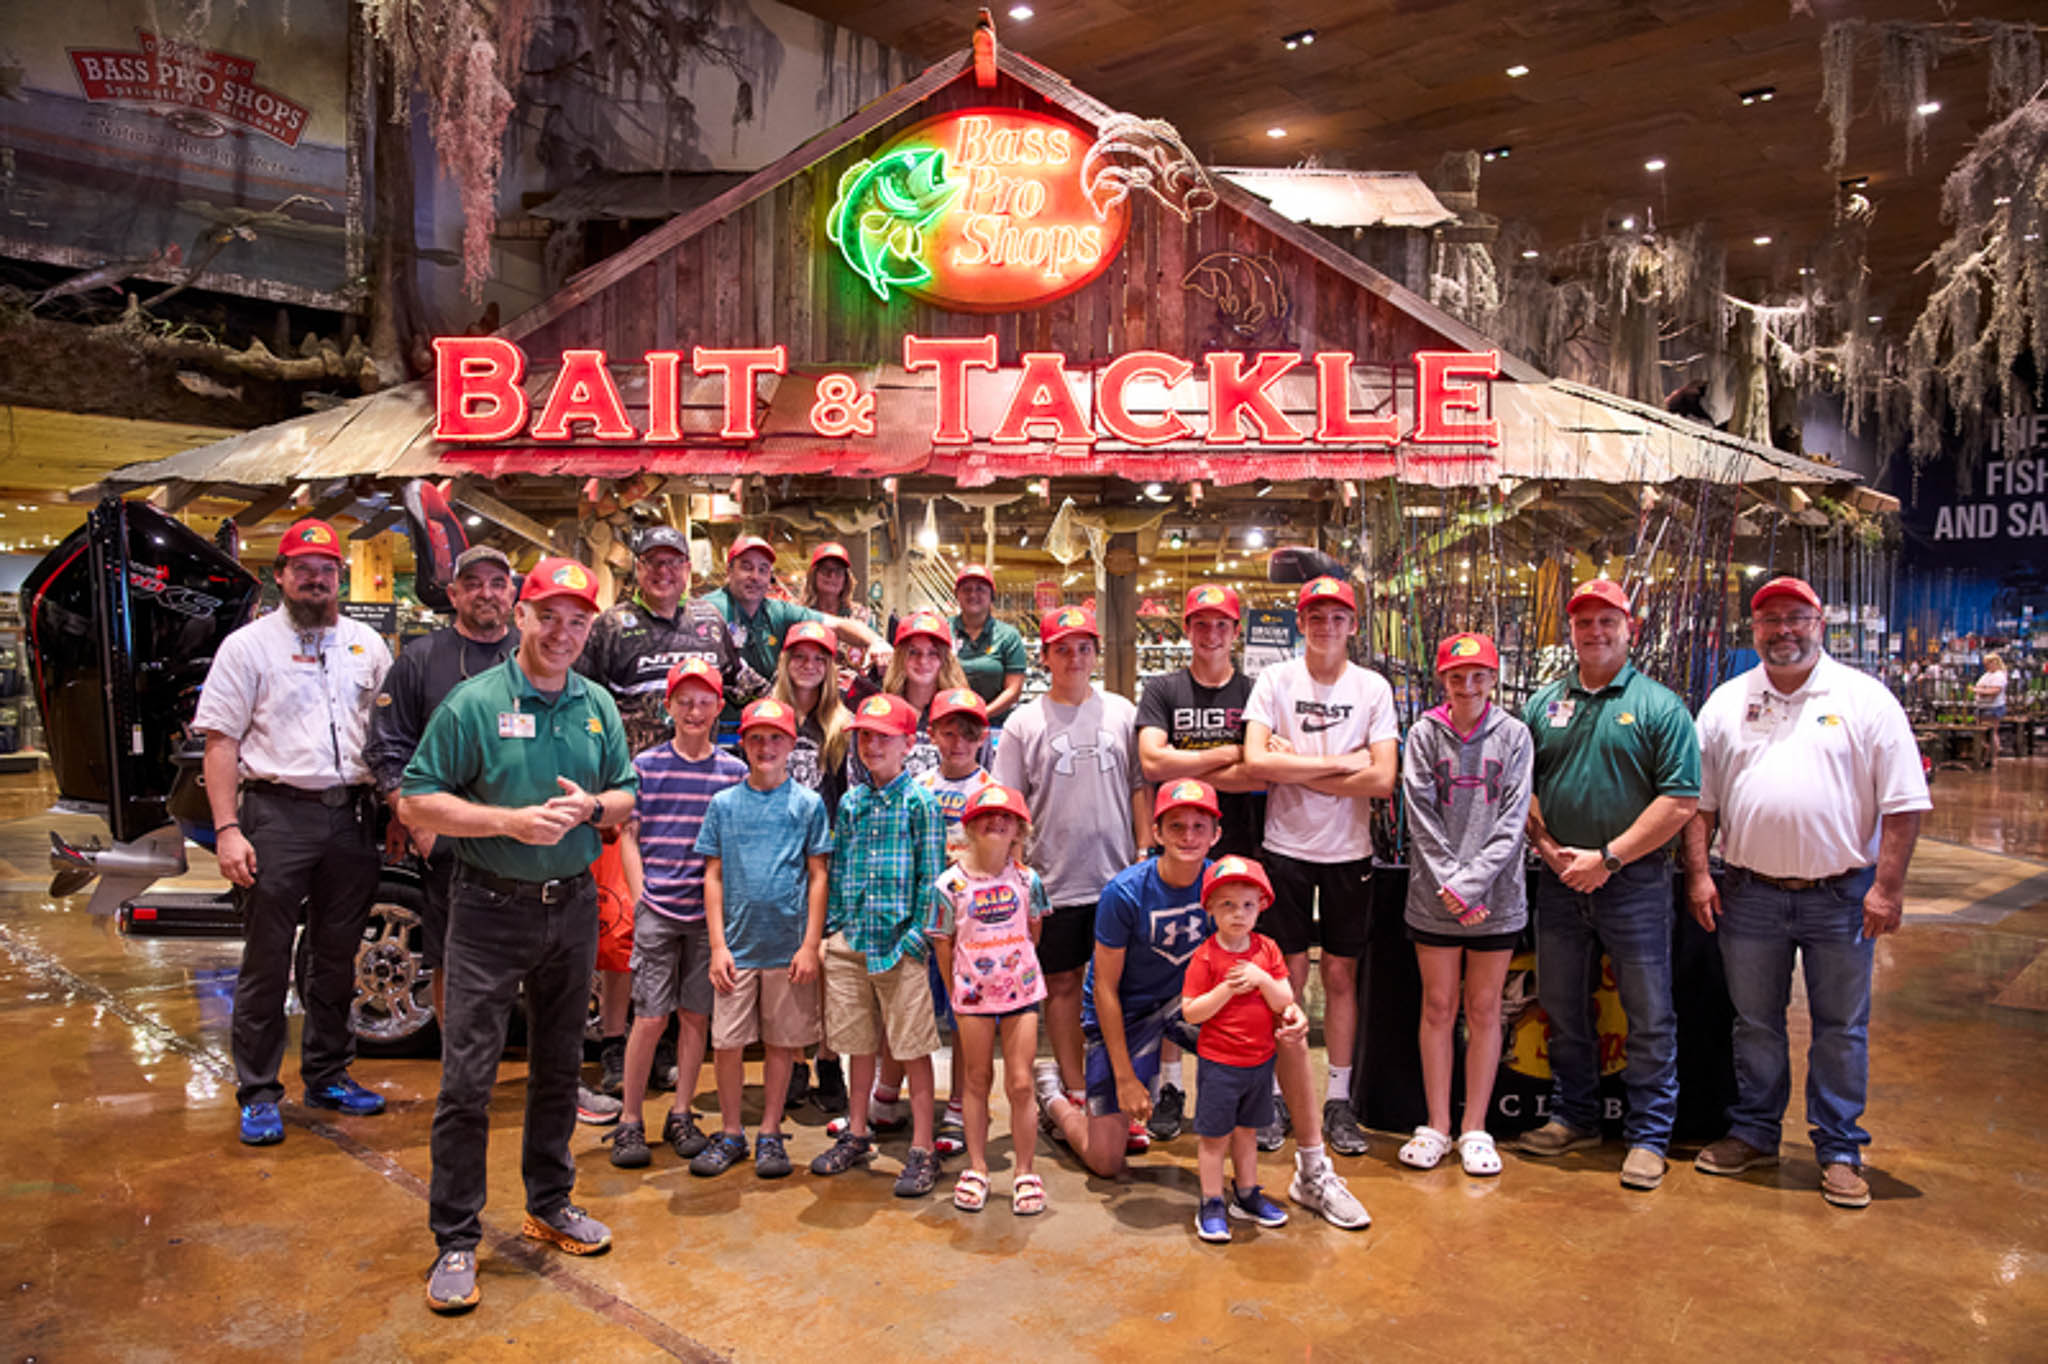 Group at Bait & Tackle - Bass Pro